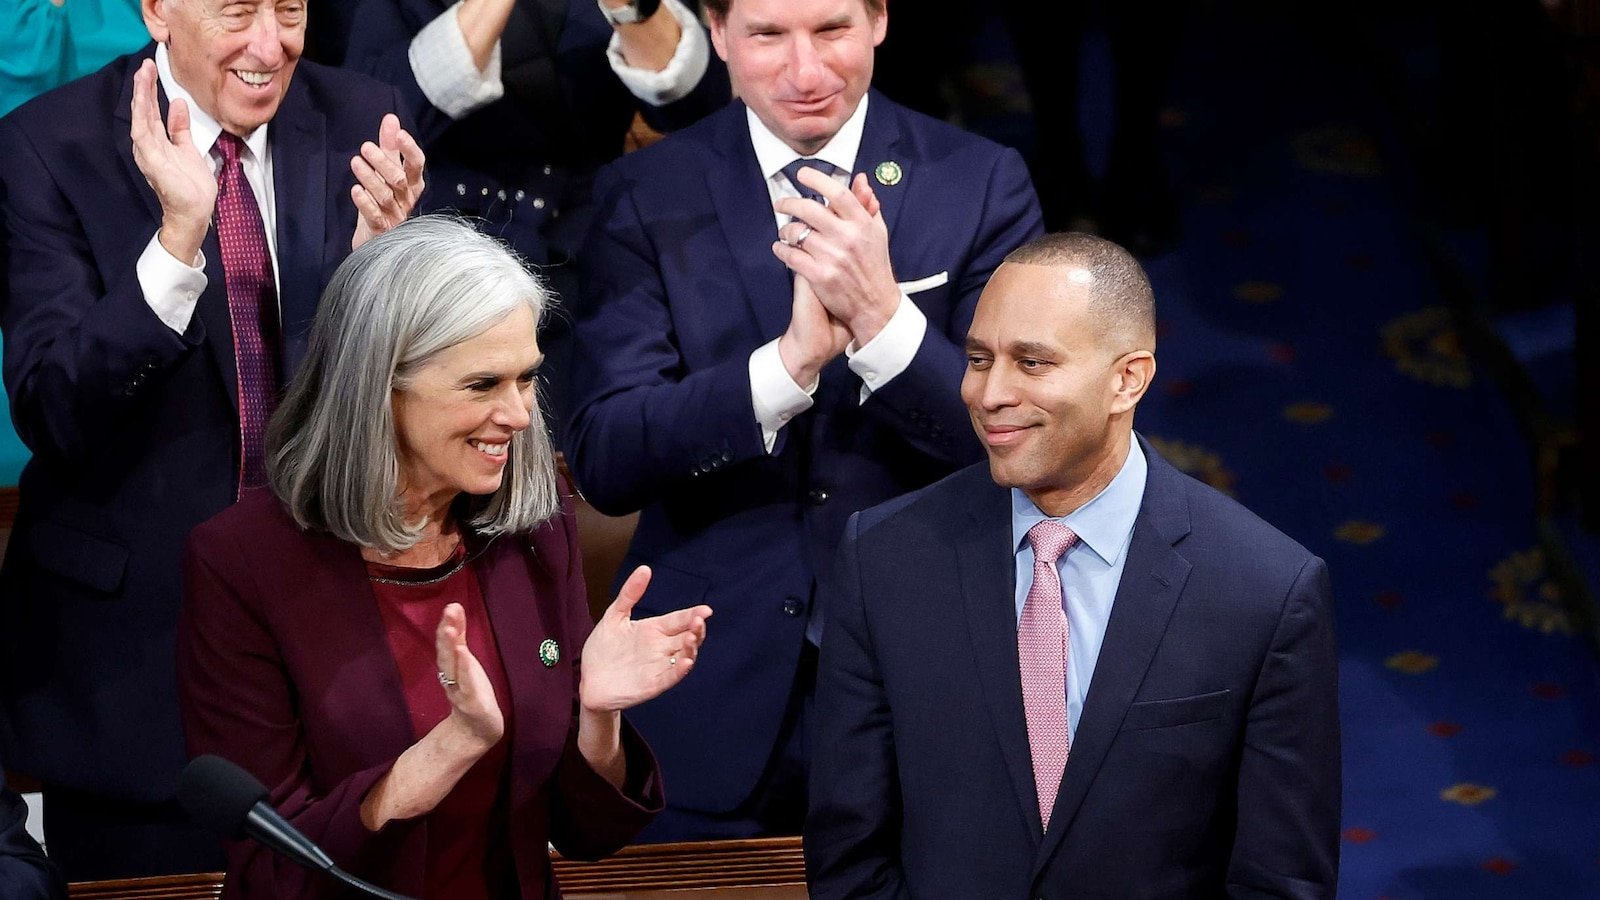 New Congress was historic in more ways than one: Recap of notable moments